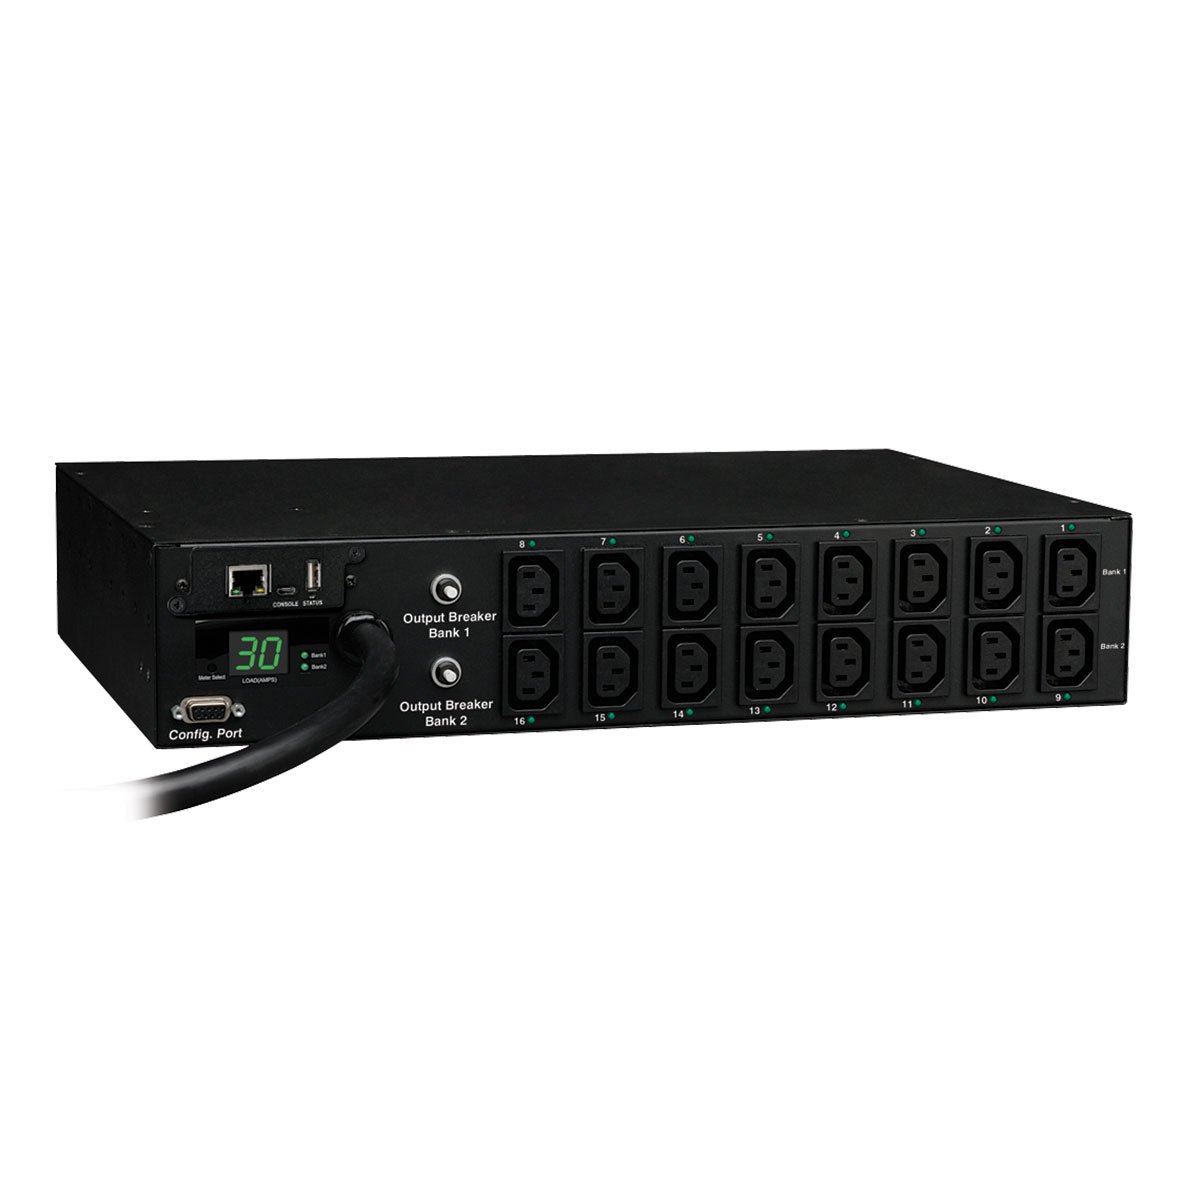 Switched Rack PDUs